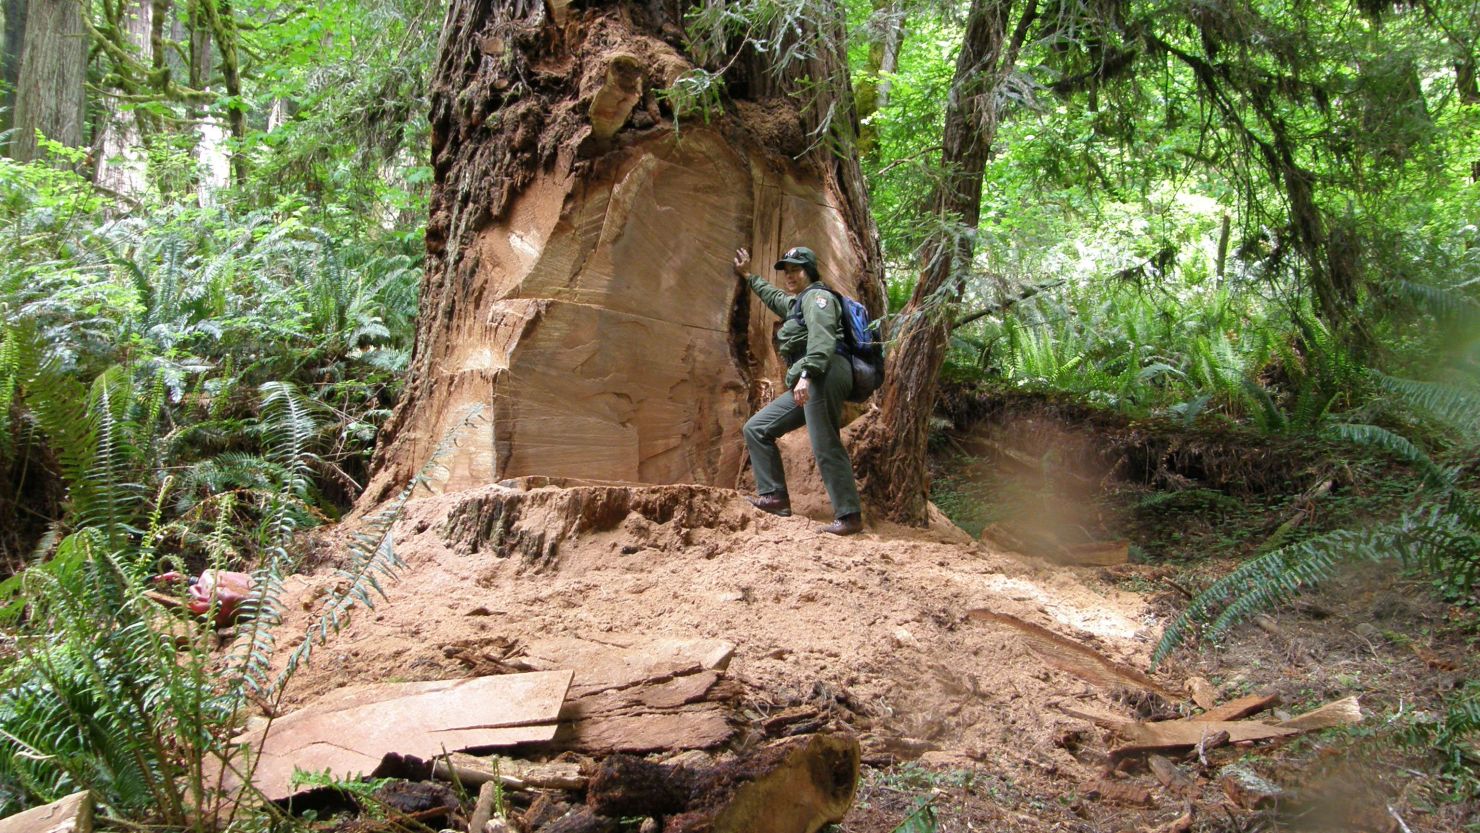 Wildlife biologist Terry Hines stands next to a poached redwood tree in California in May 2013. The burls provide unique and beautiful patterns for coffee tables and bar counter tops.